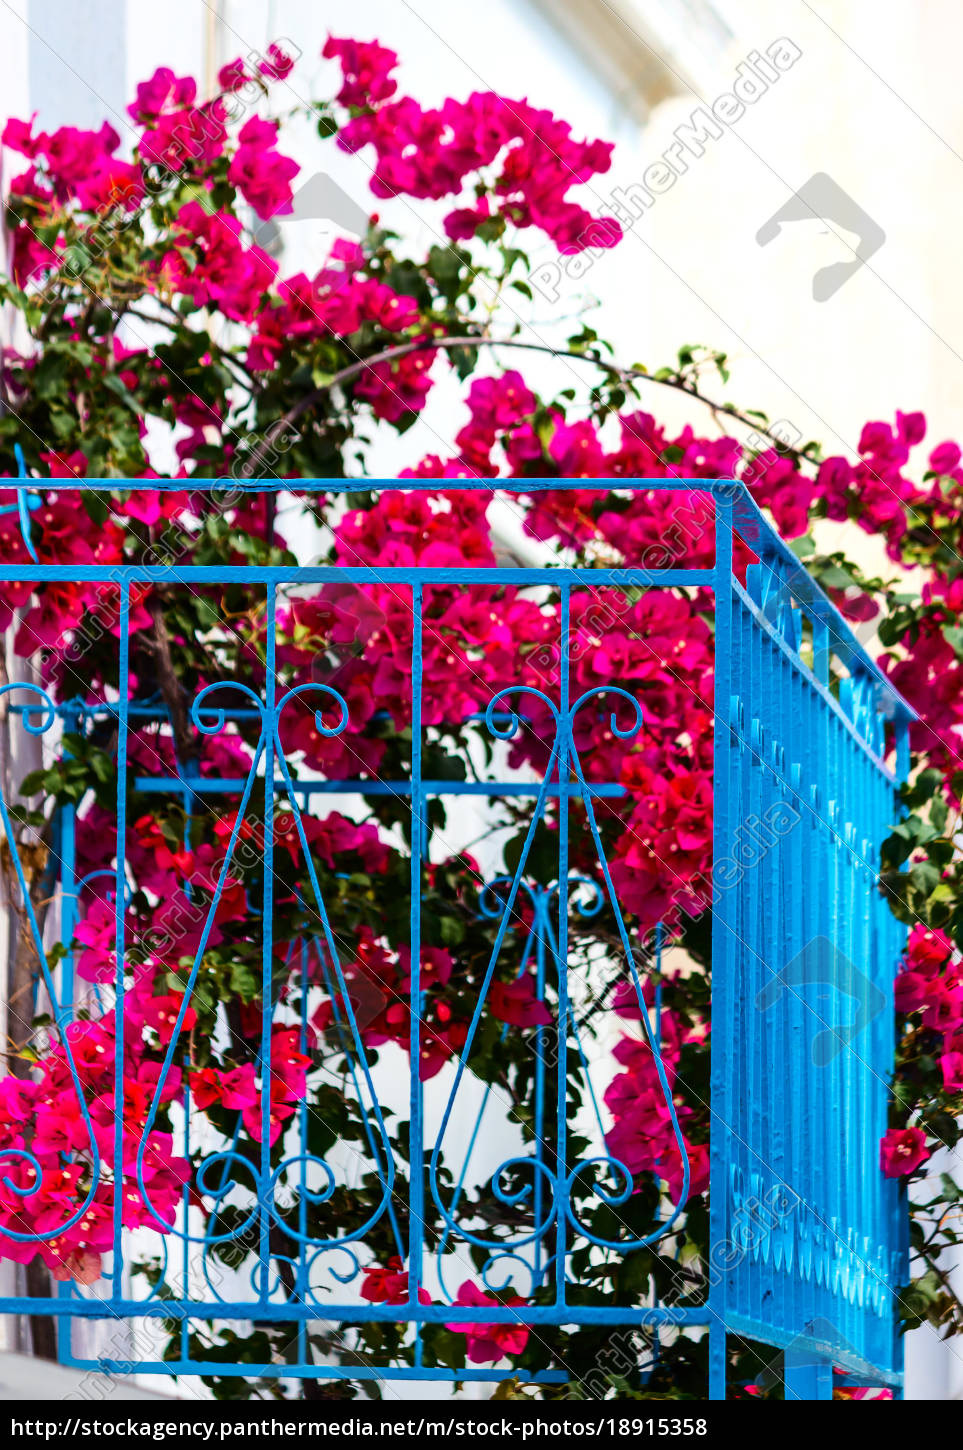 Blue Balcony With Pink Flowering Bougainvillea Stock Image 18915358 Panthermedia Stock Agency